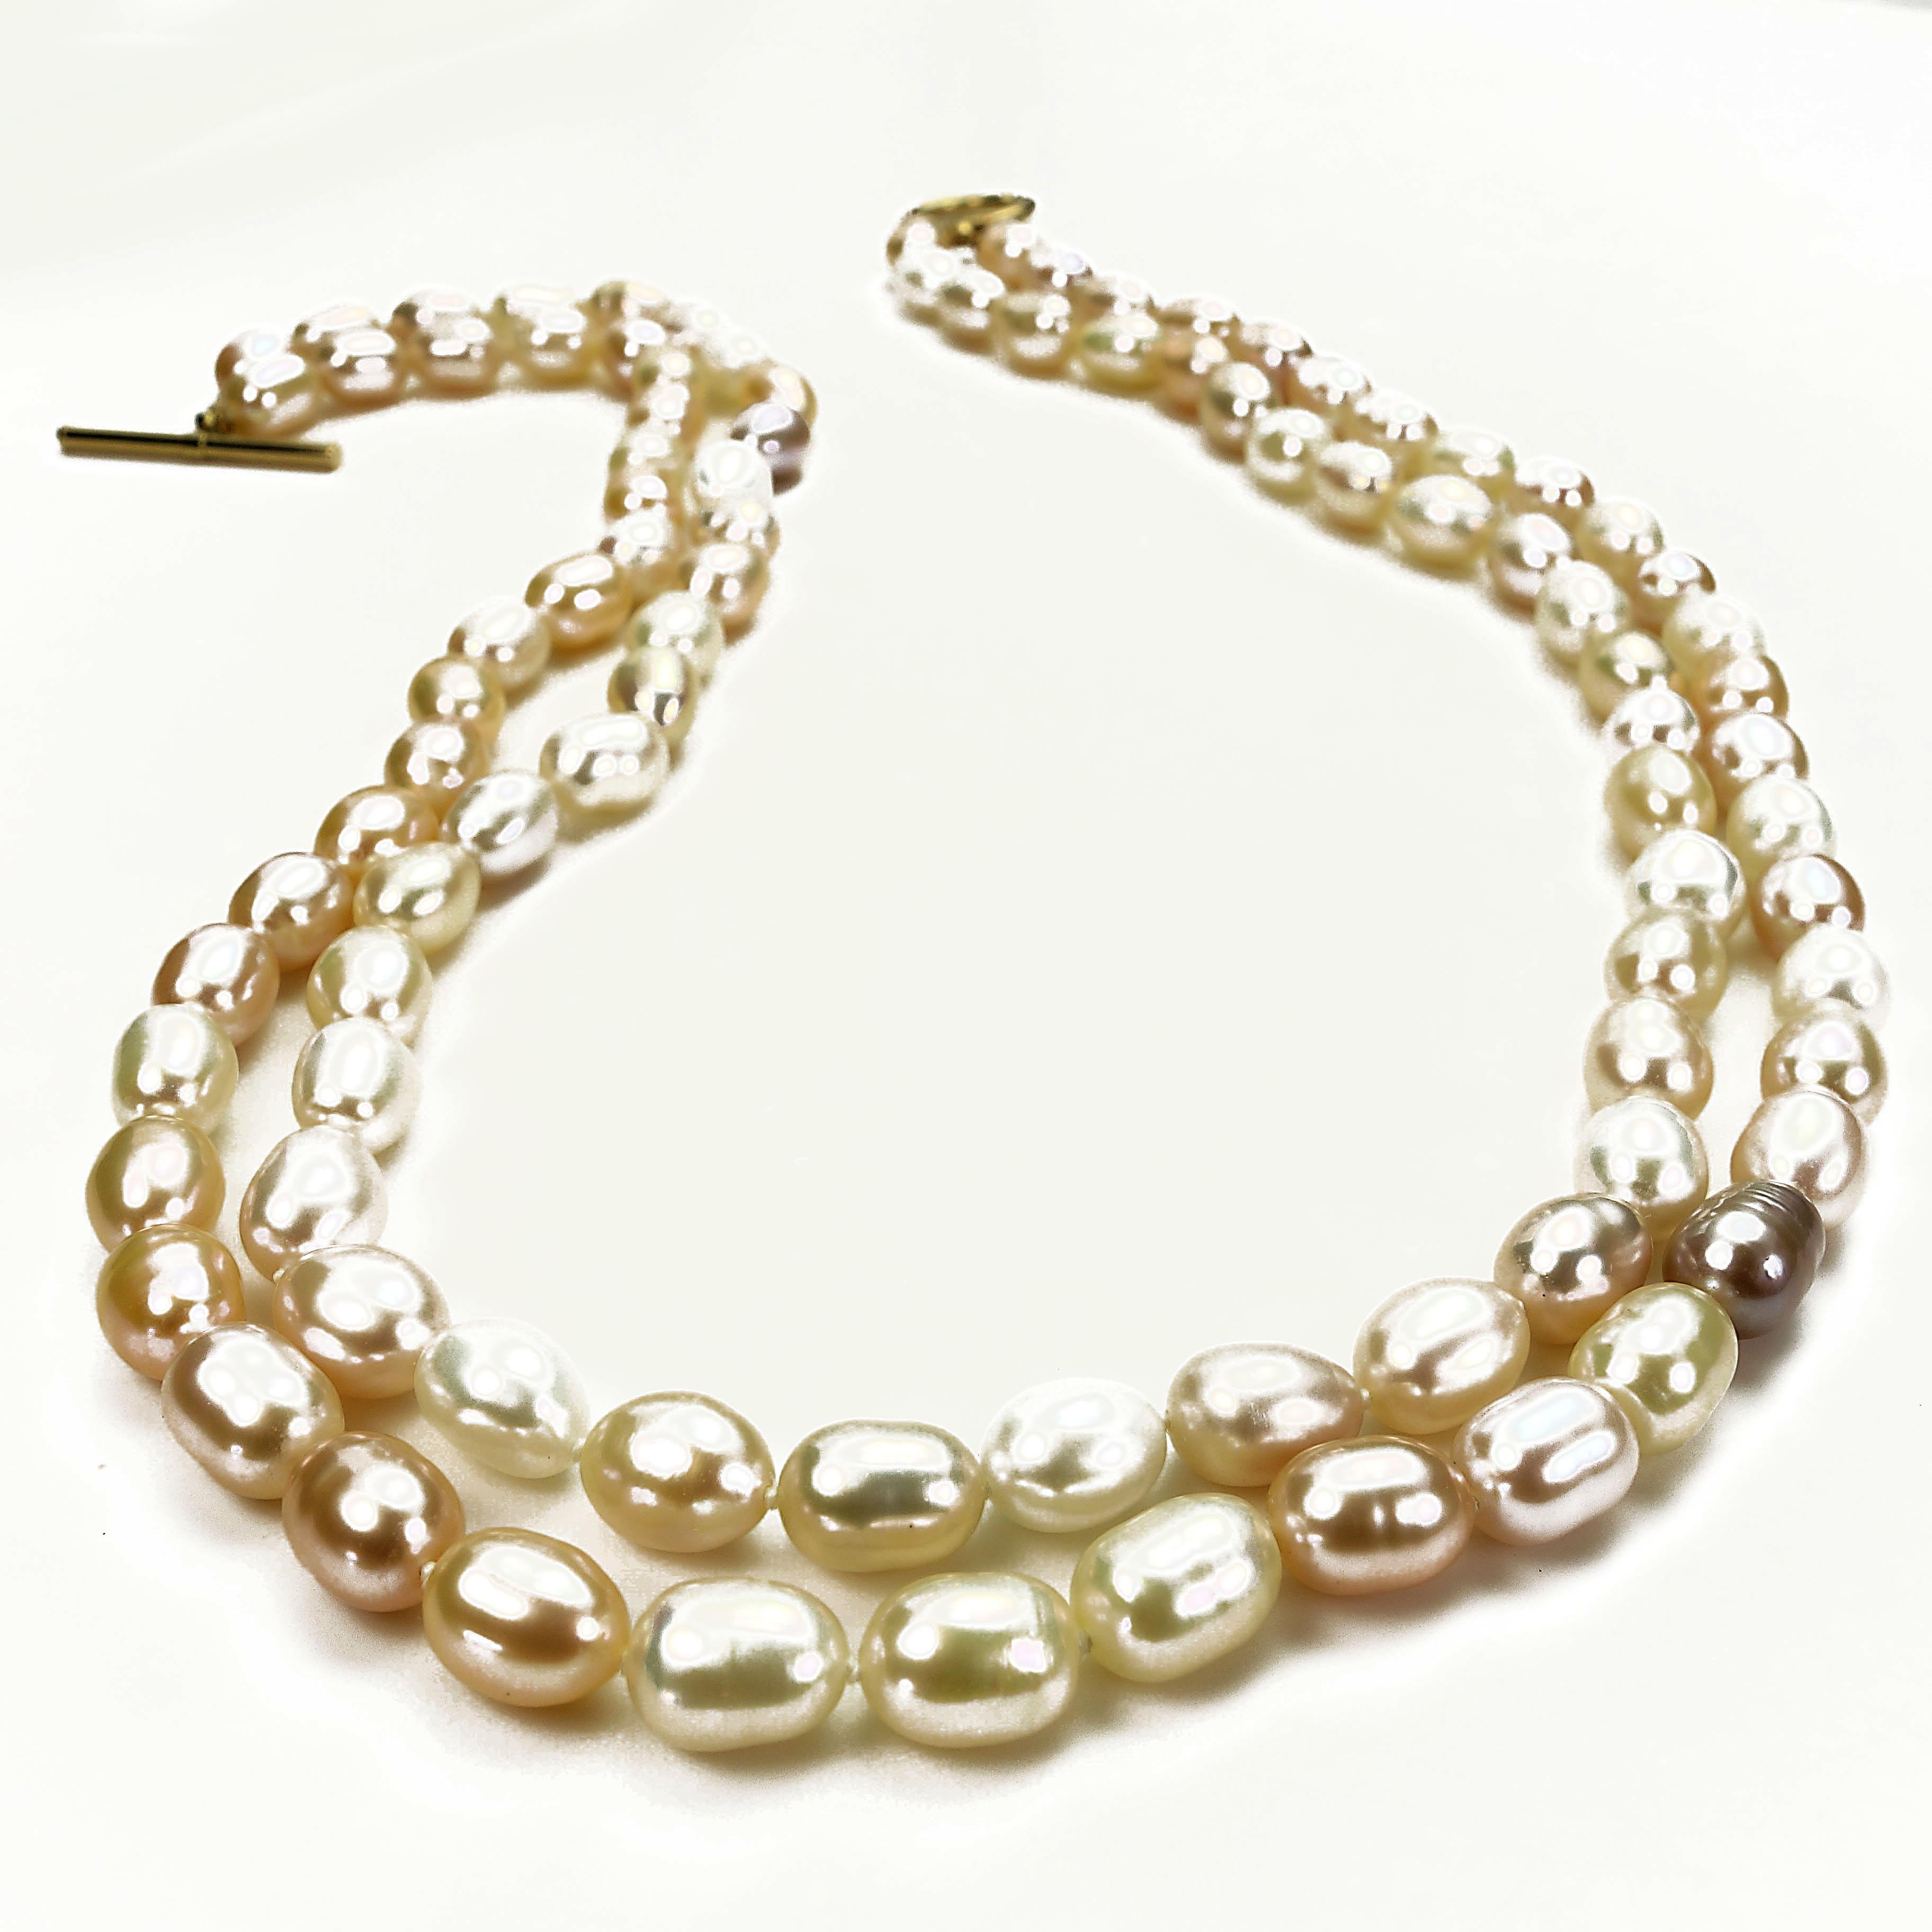 Artisan Gemjunky Double Strand Peach Color Freshwater Pearl Necklace